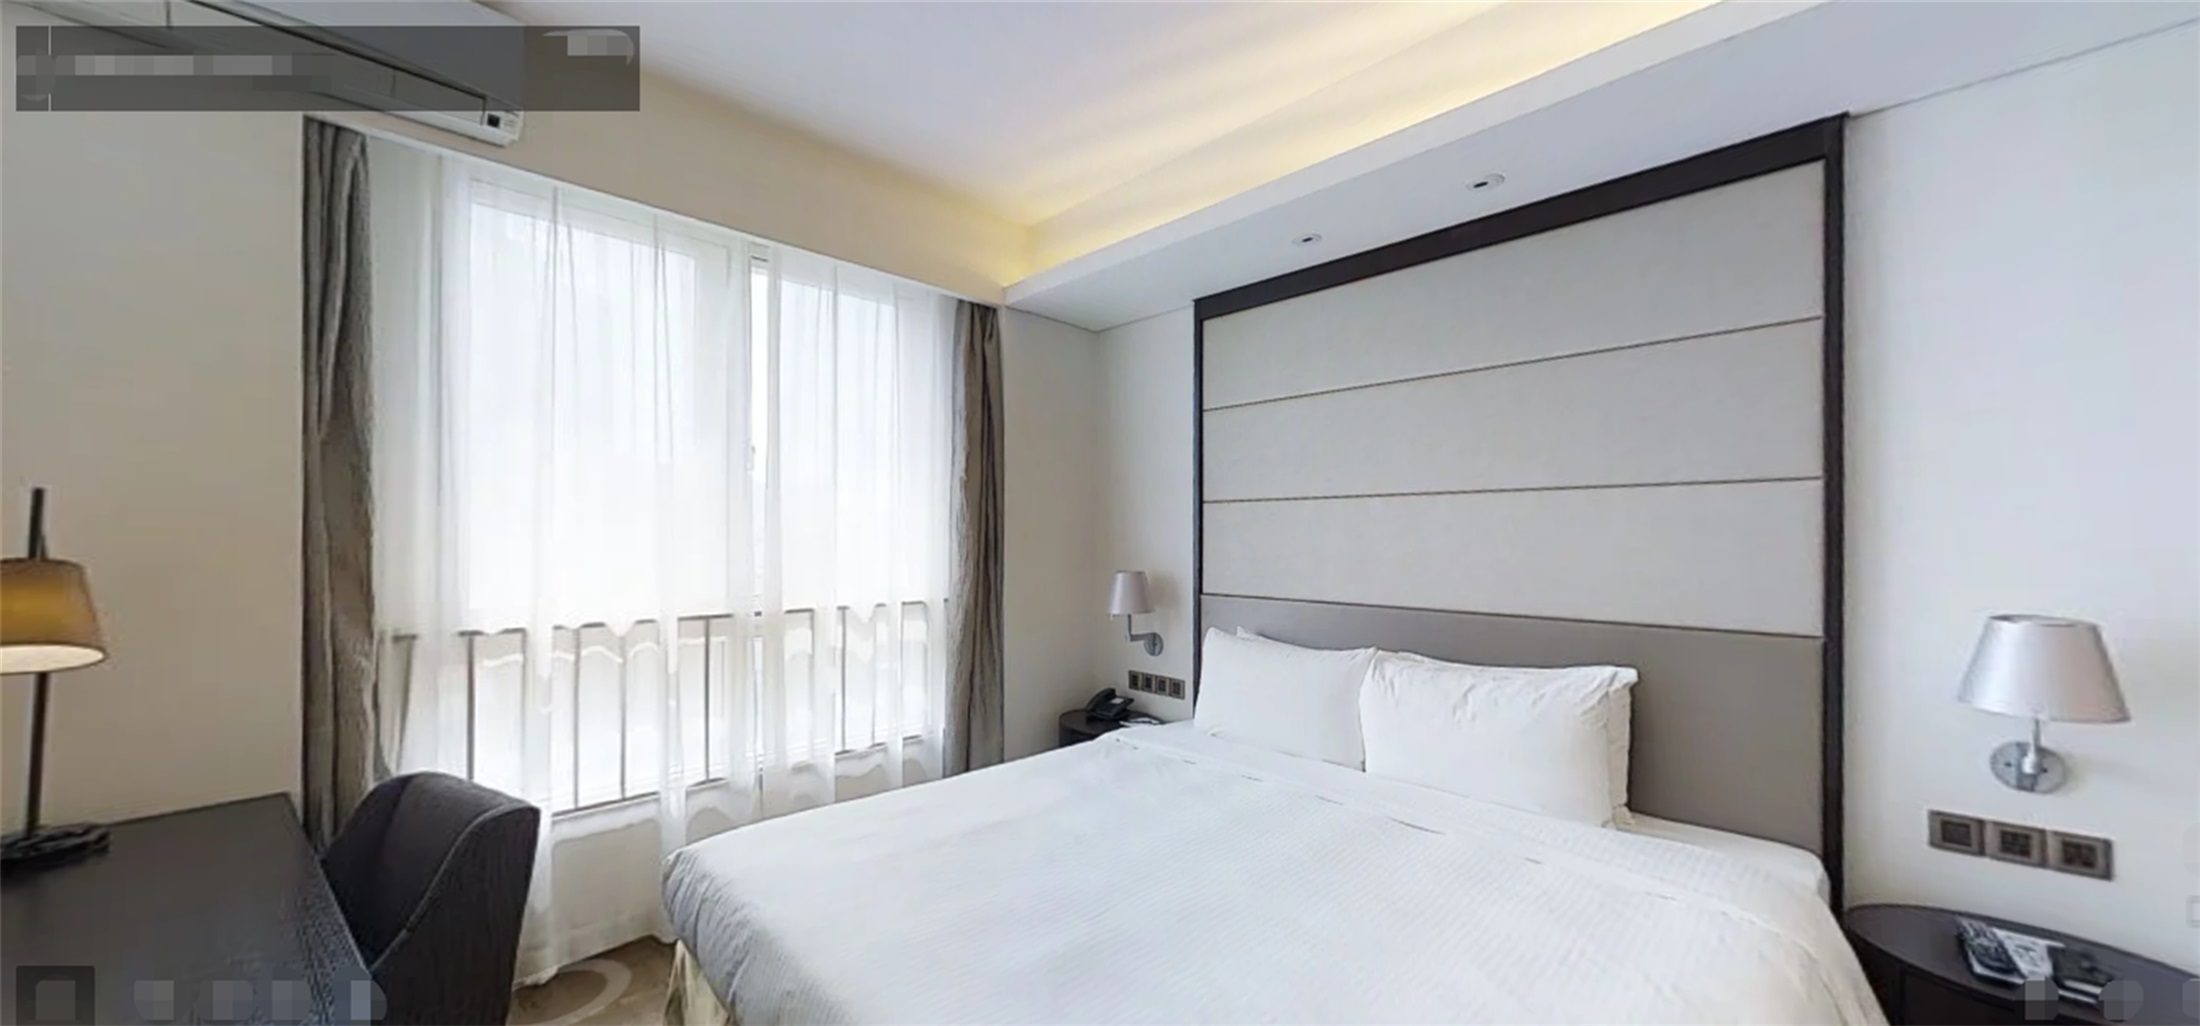 Big Bedroom Spacious High-Quality FFC Service Apartments for Rent in Shanghai